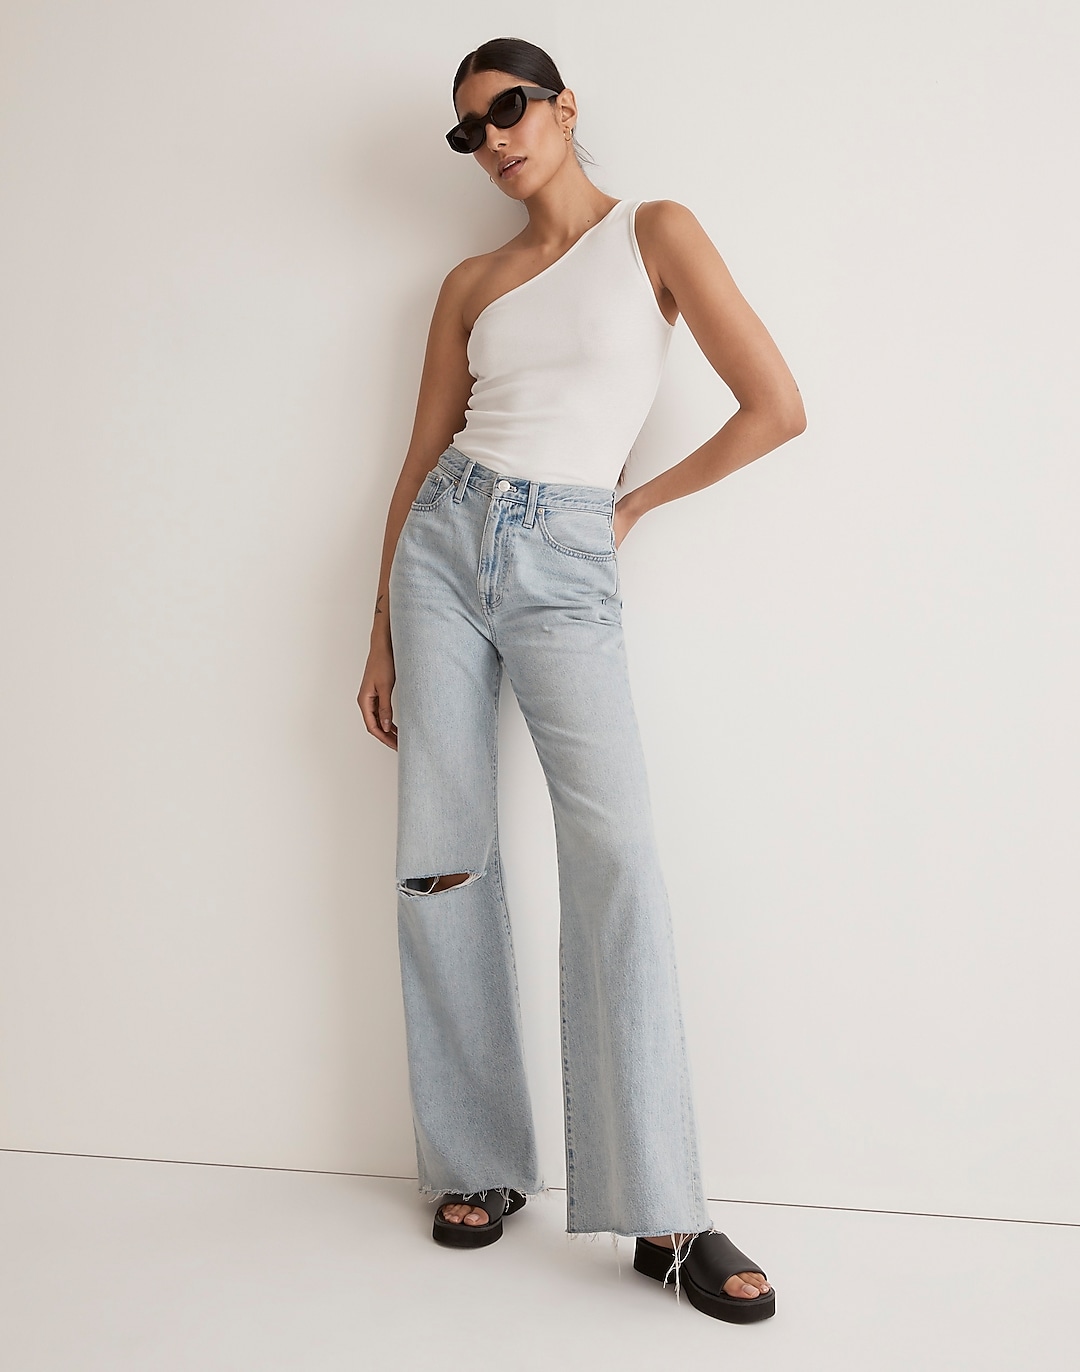 Baggy Flare Jeans in Luzon Wash: Knee-Slit Edition